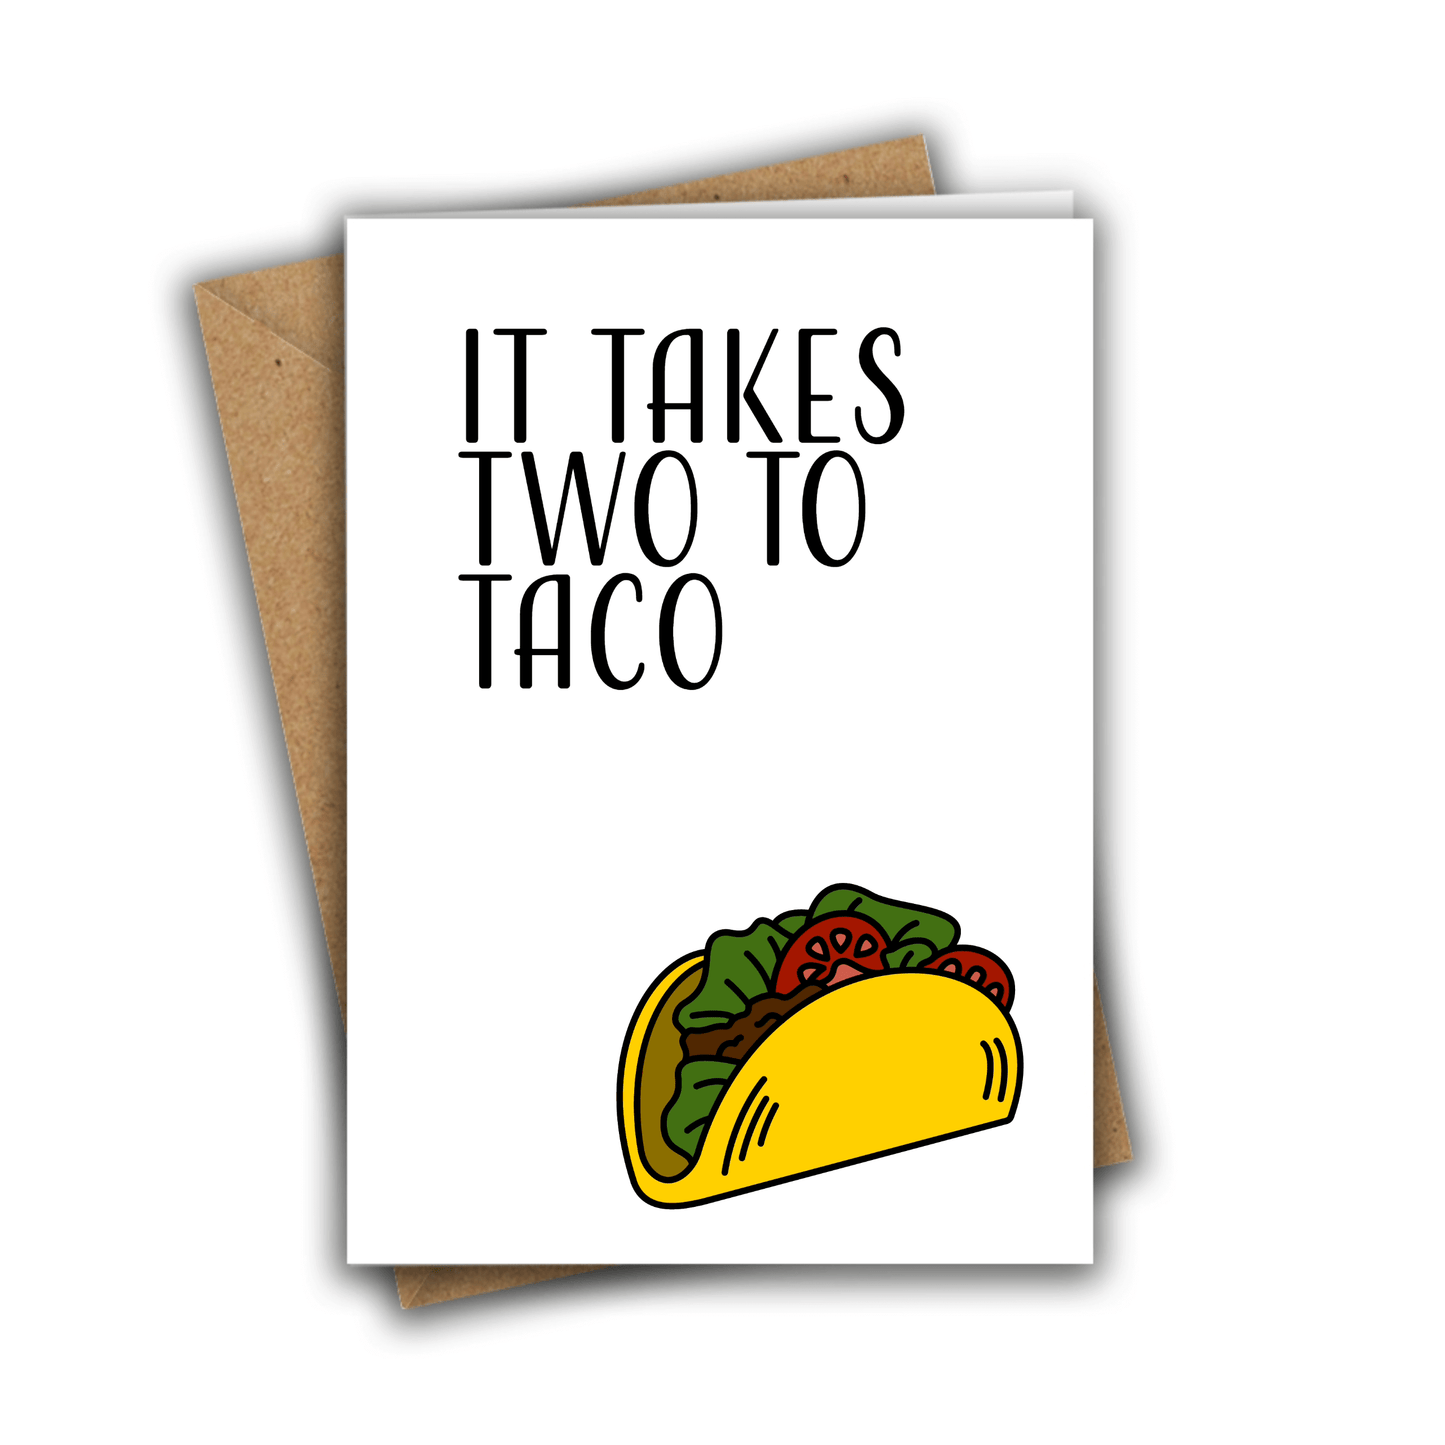 Little Kraken's It Takes Two to Taco, Love Cards for £3.50 each